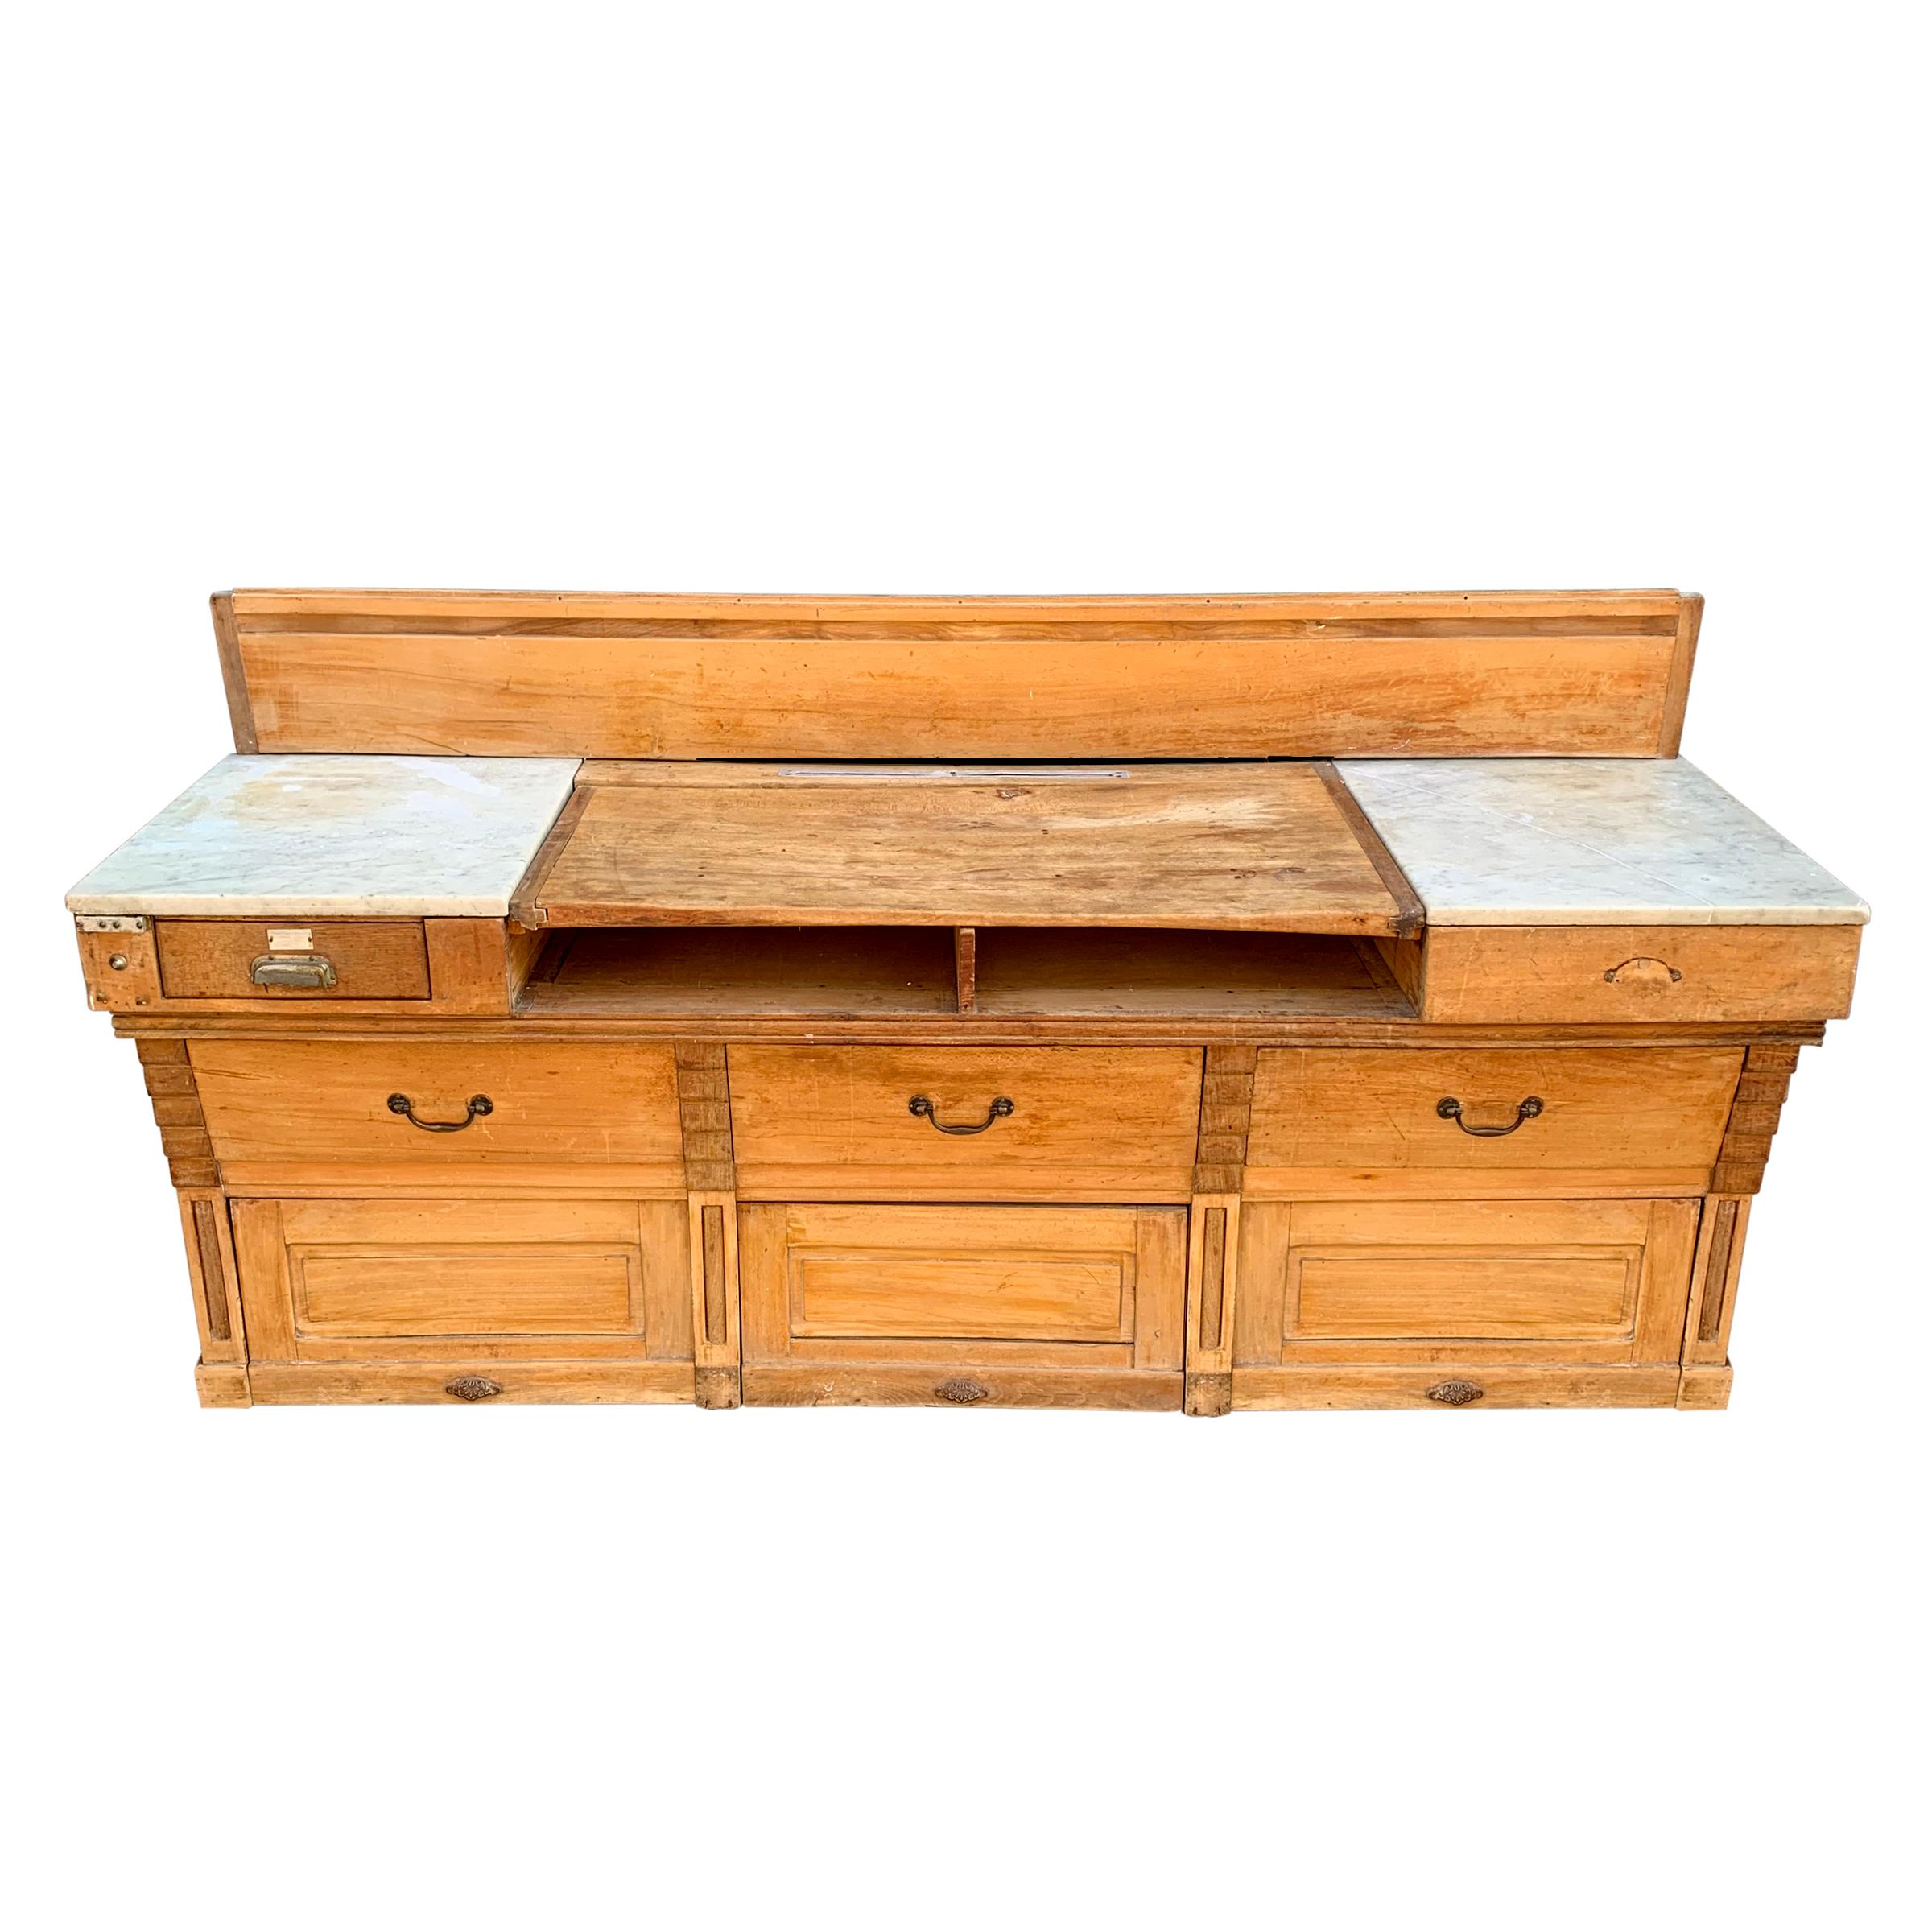 A wonderful early 20th century French butcher's block with a removable and reversible central cutting board flanked by two marble sides over three wide deep drawers and three storage compartments at the bottom. Would be incredible in a restaurant or